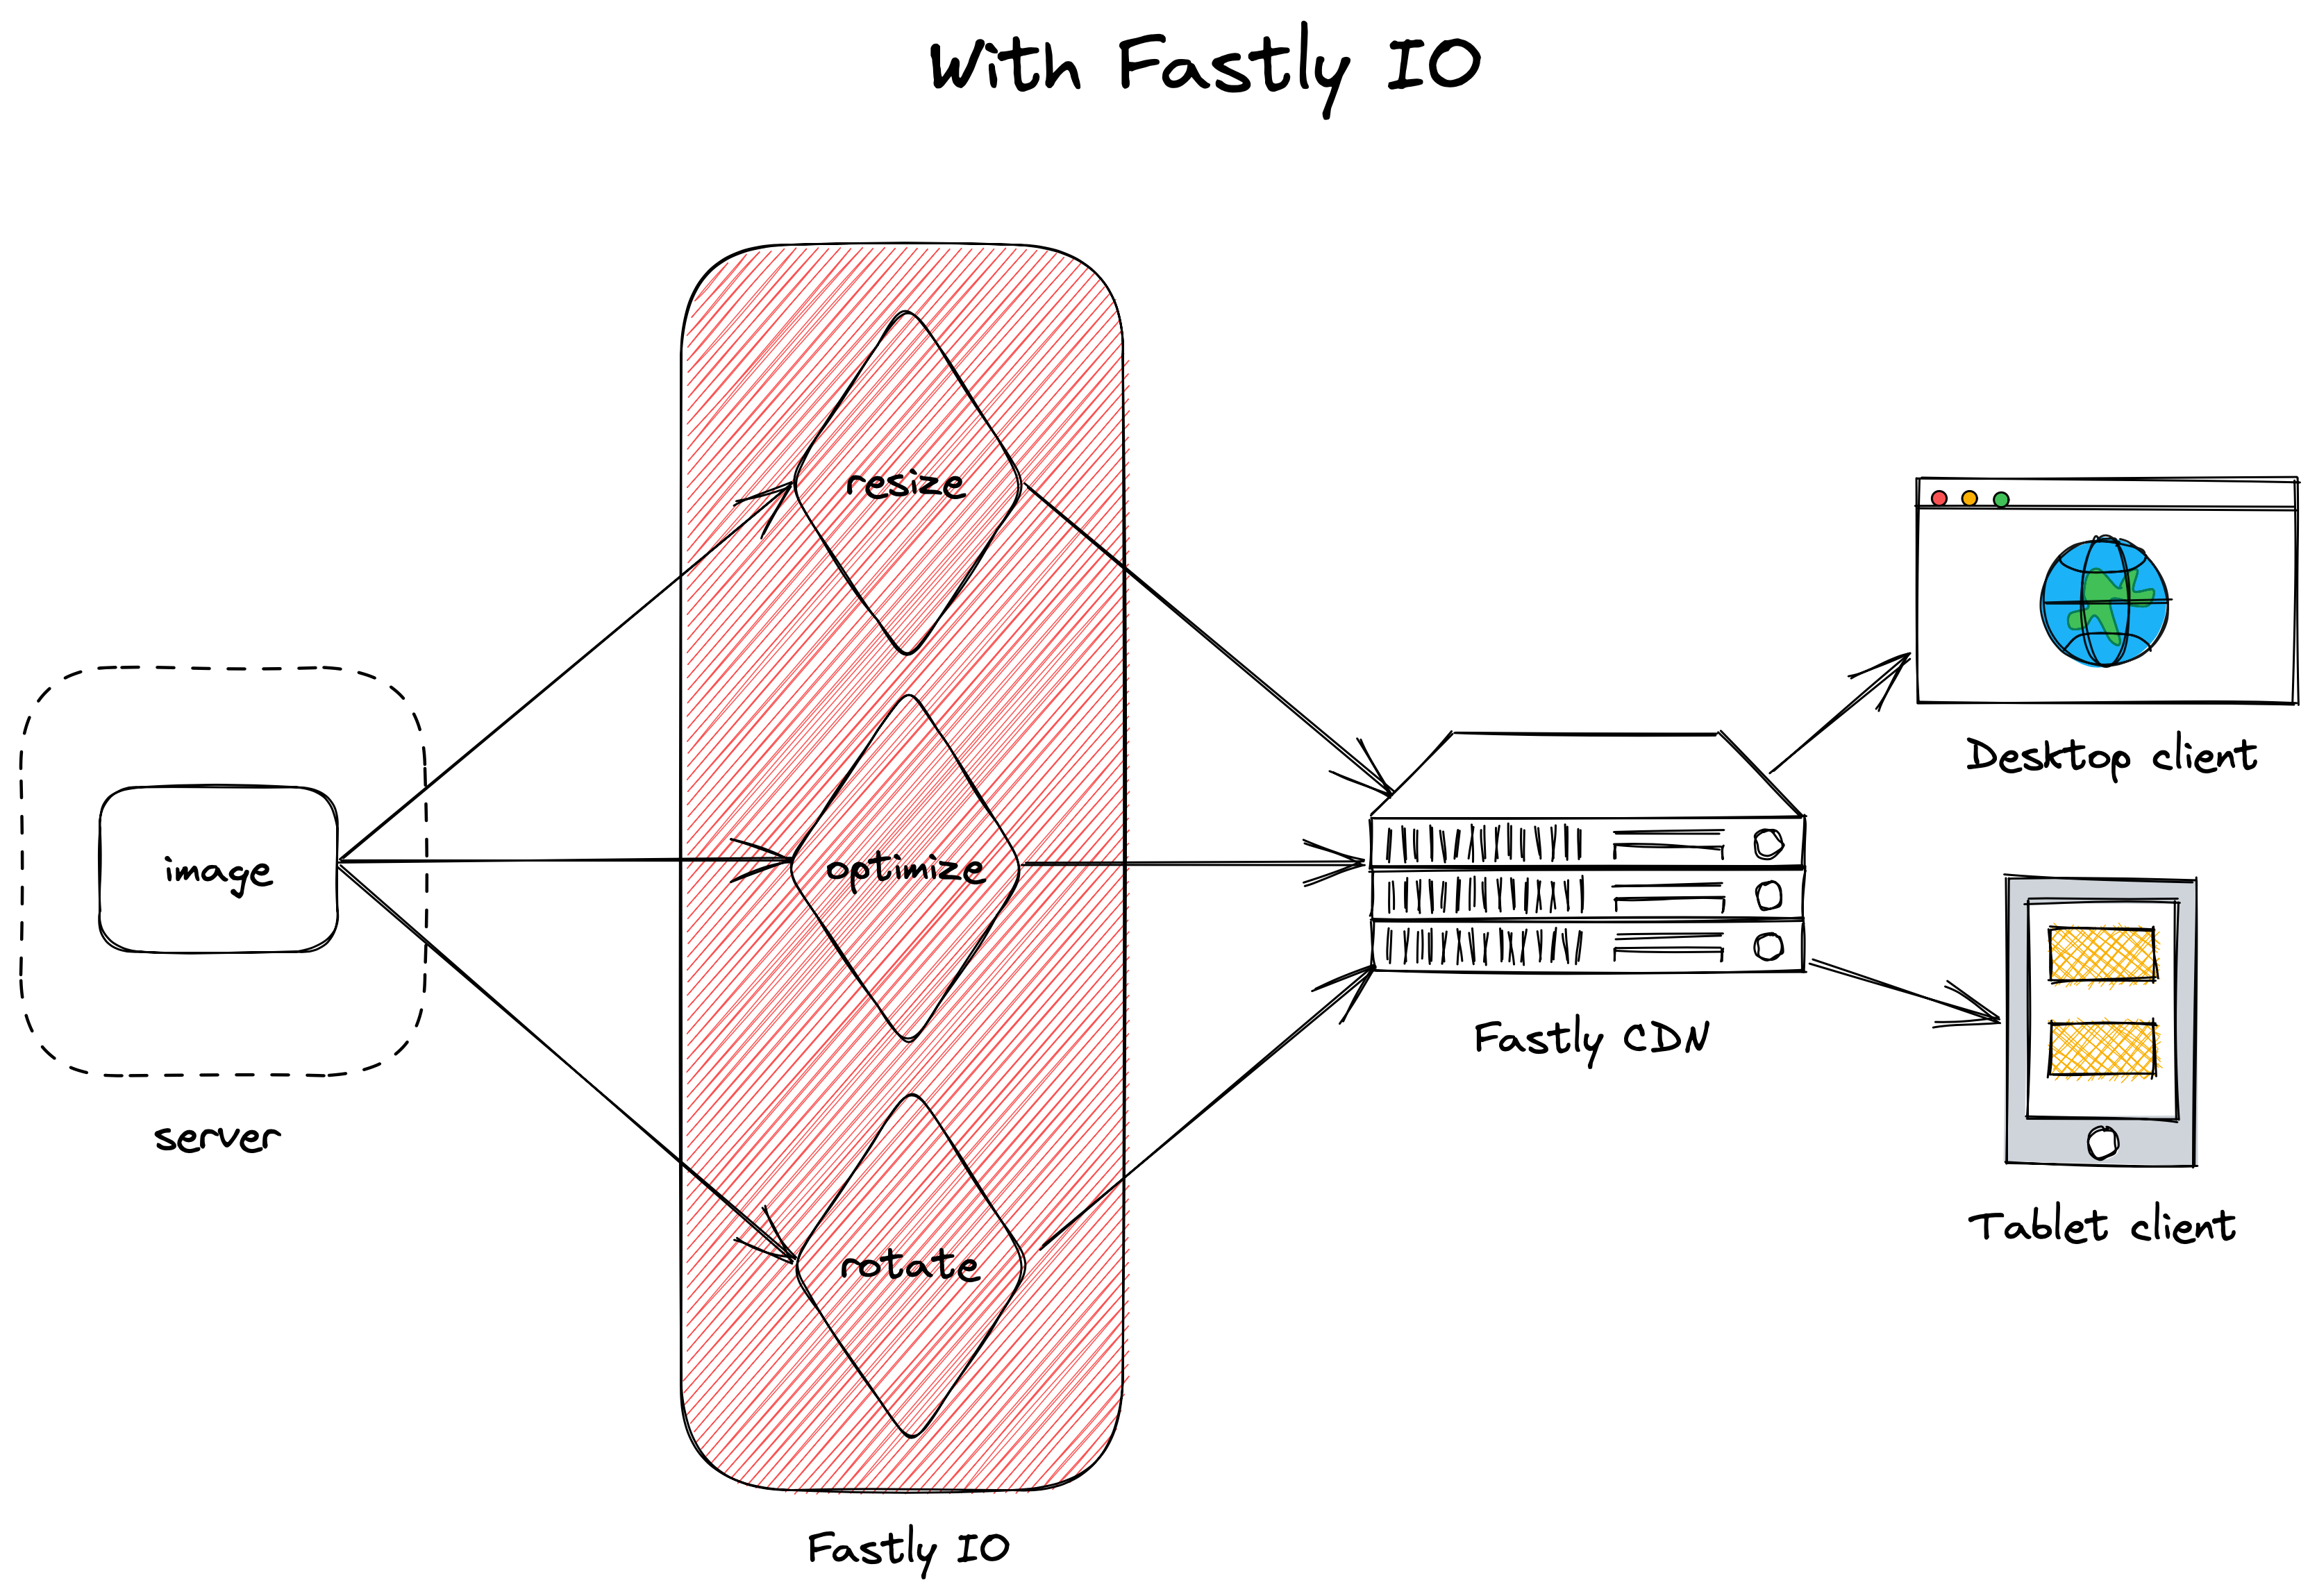 How images load with Fastly IO